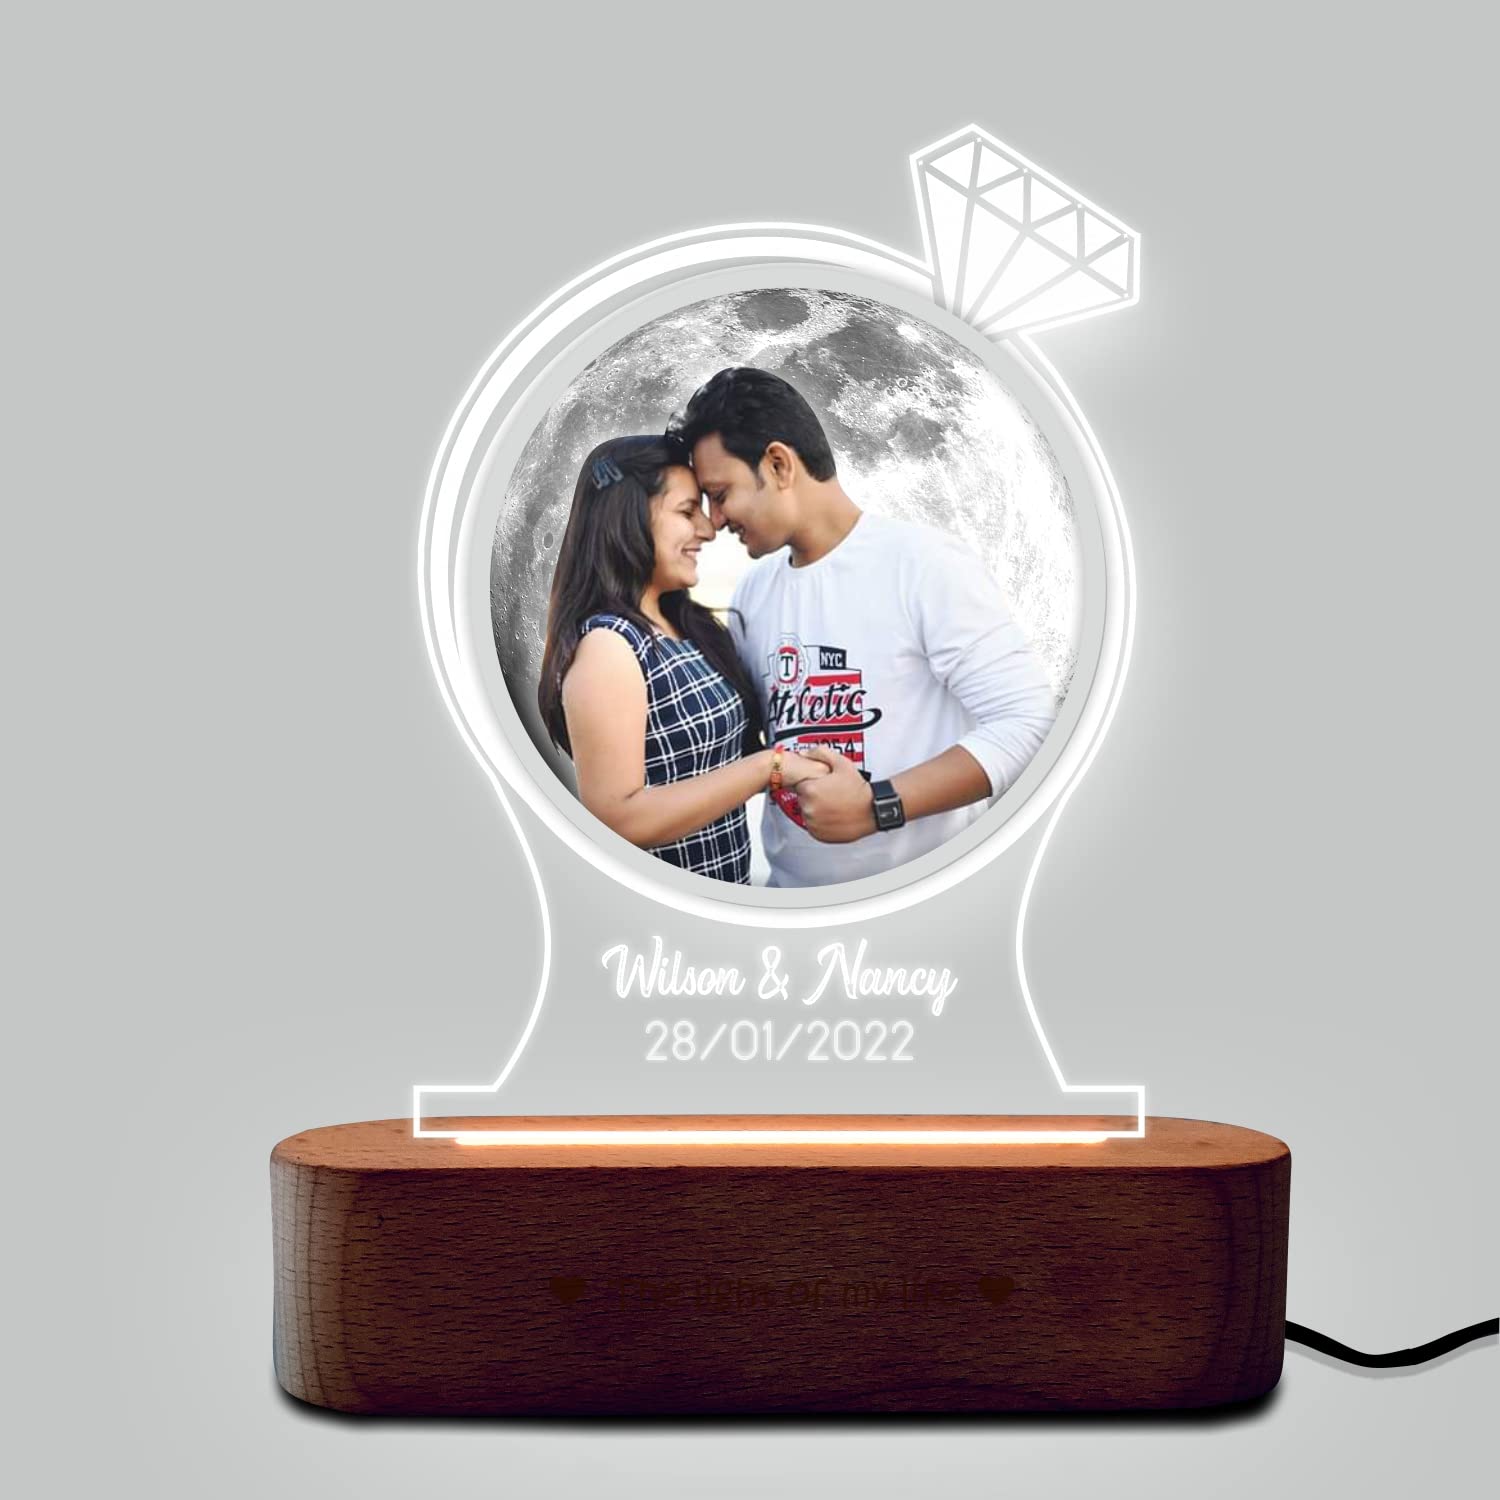 Buy Personalized Gifts Online India at Discounted Prices Now